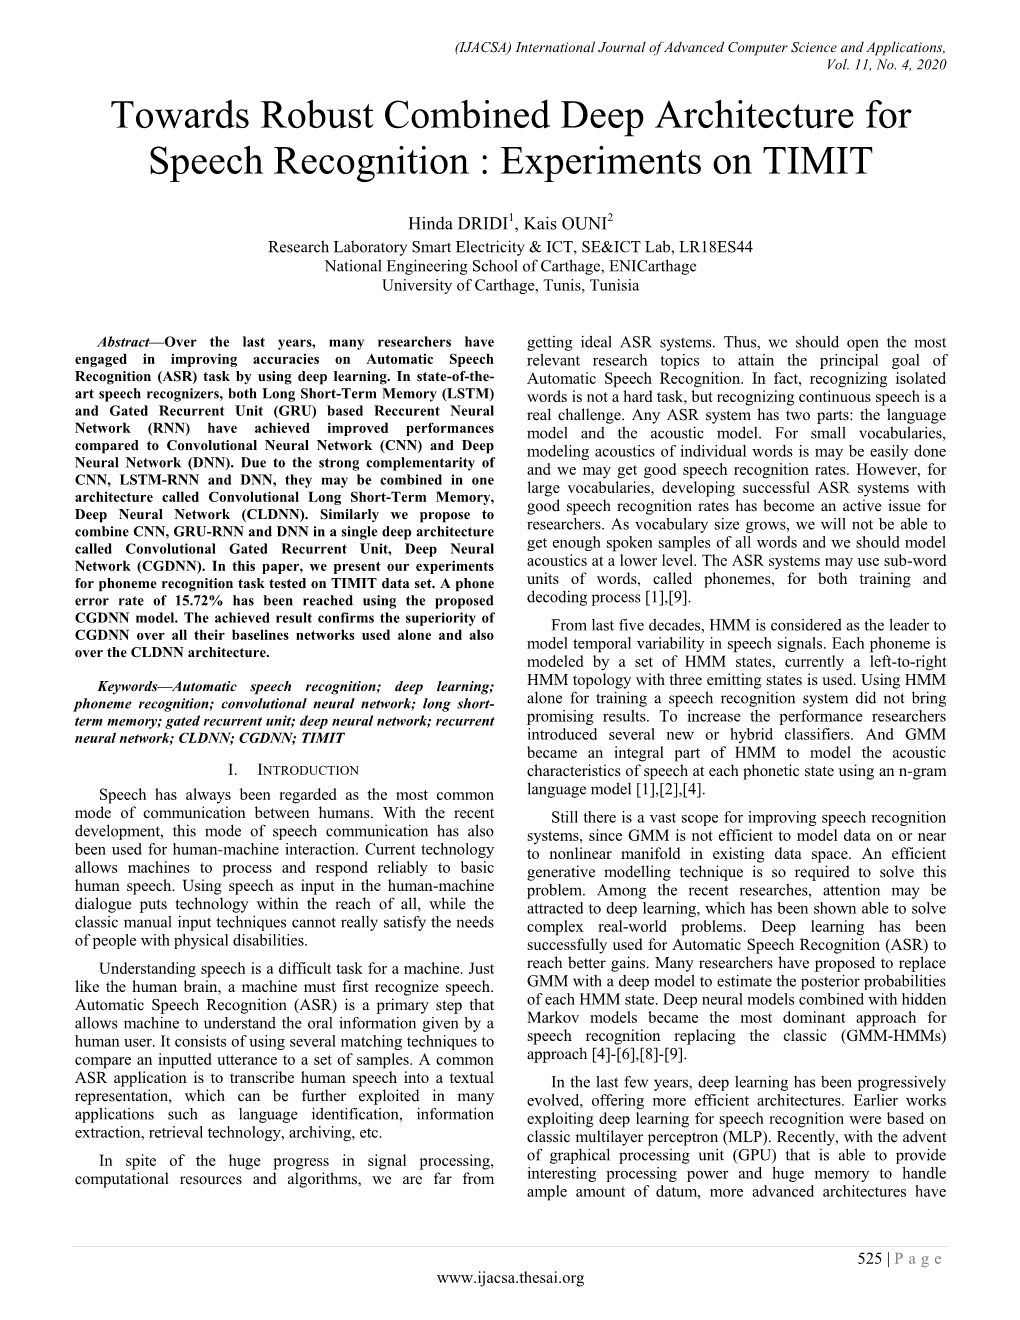 Towards Robust Combined Deep Architecture for Speech Recognition : Experiments on TIMIT